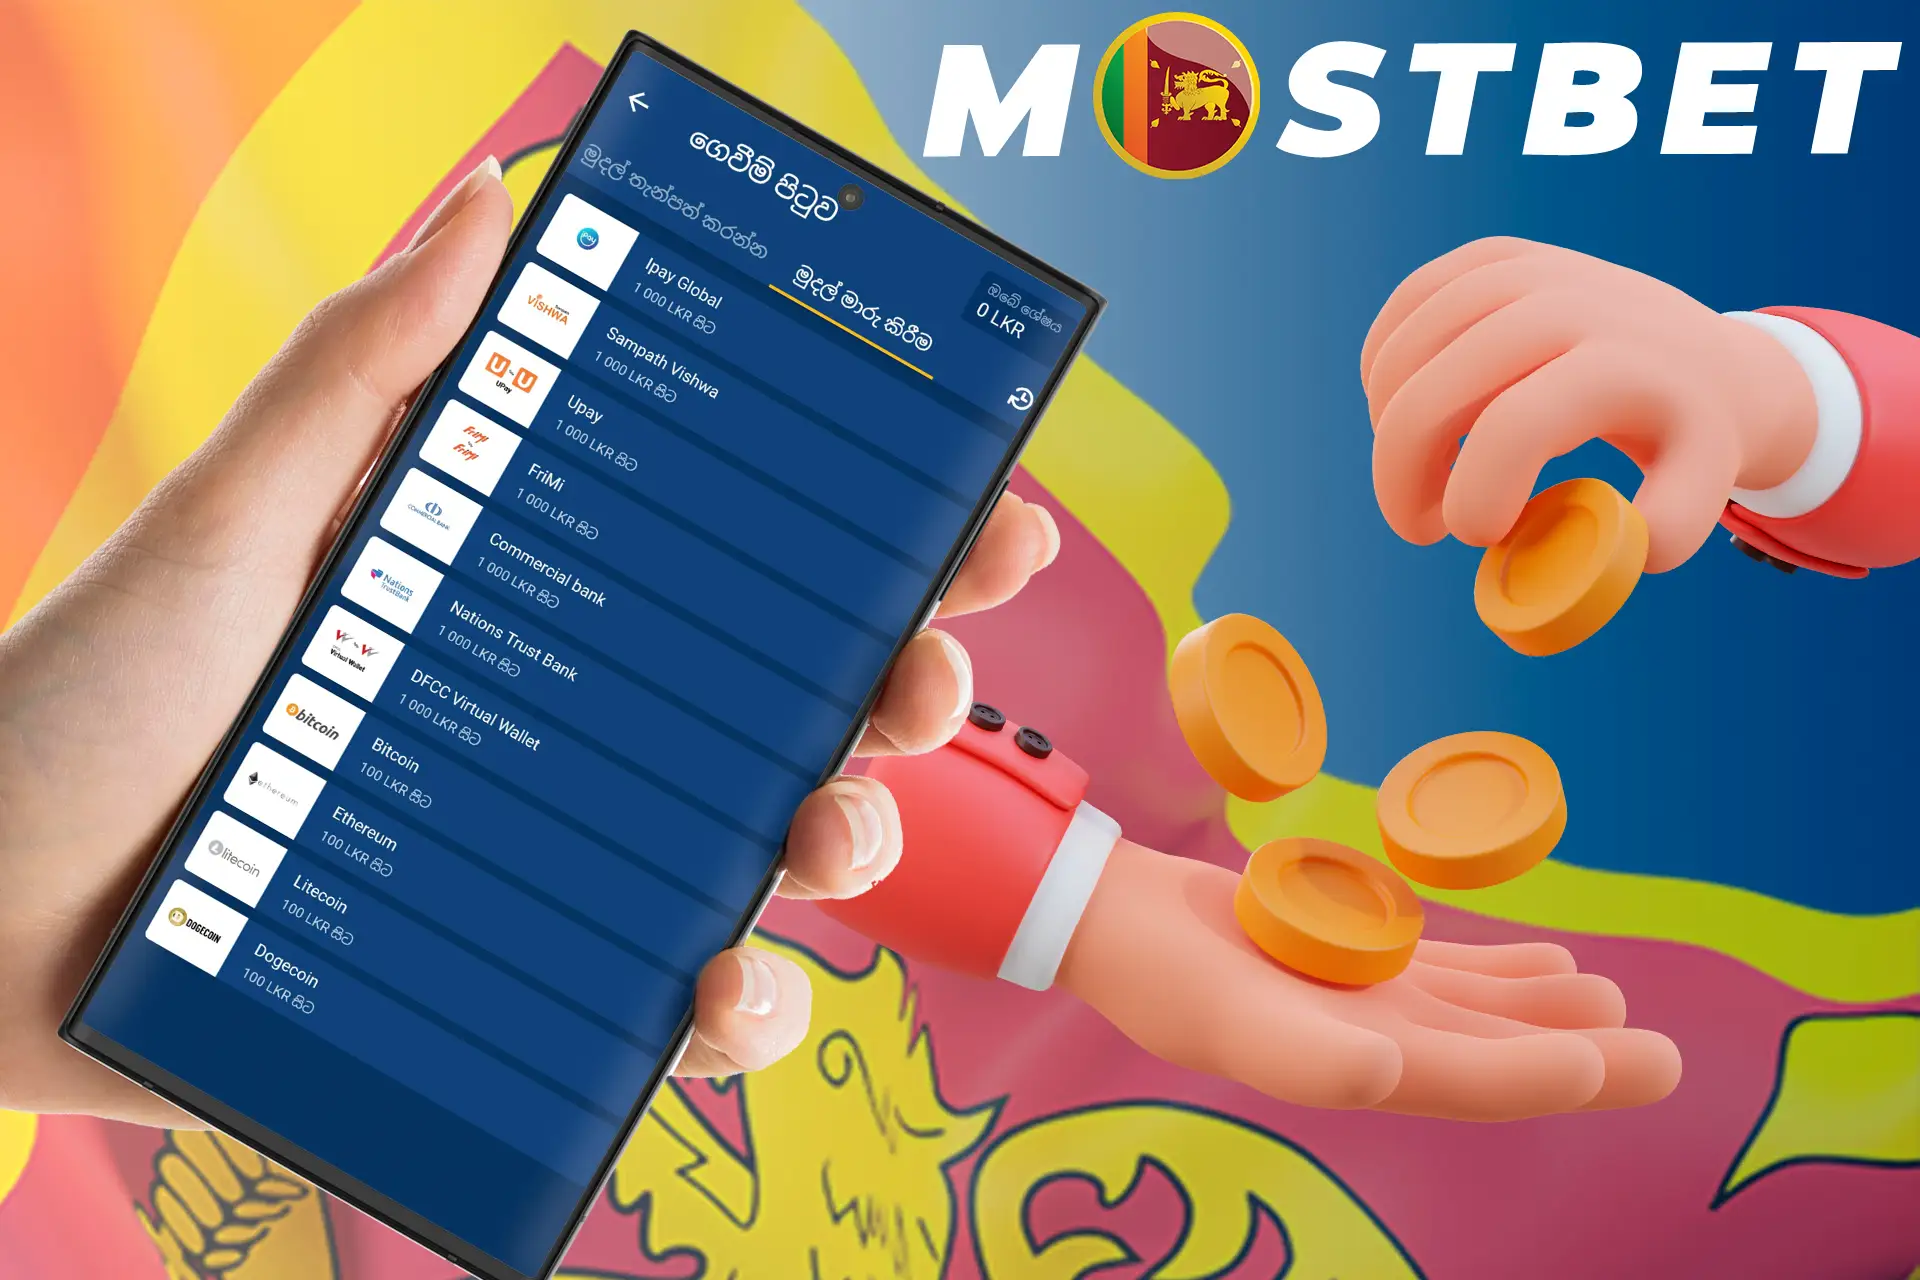 Withdraw your winnings to Mostbet Sri Lanka